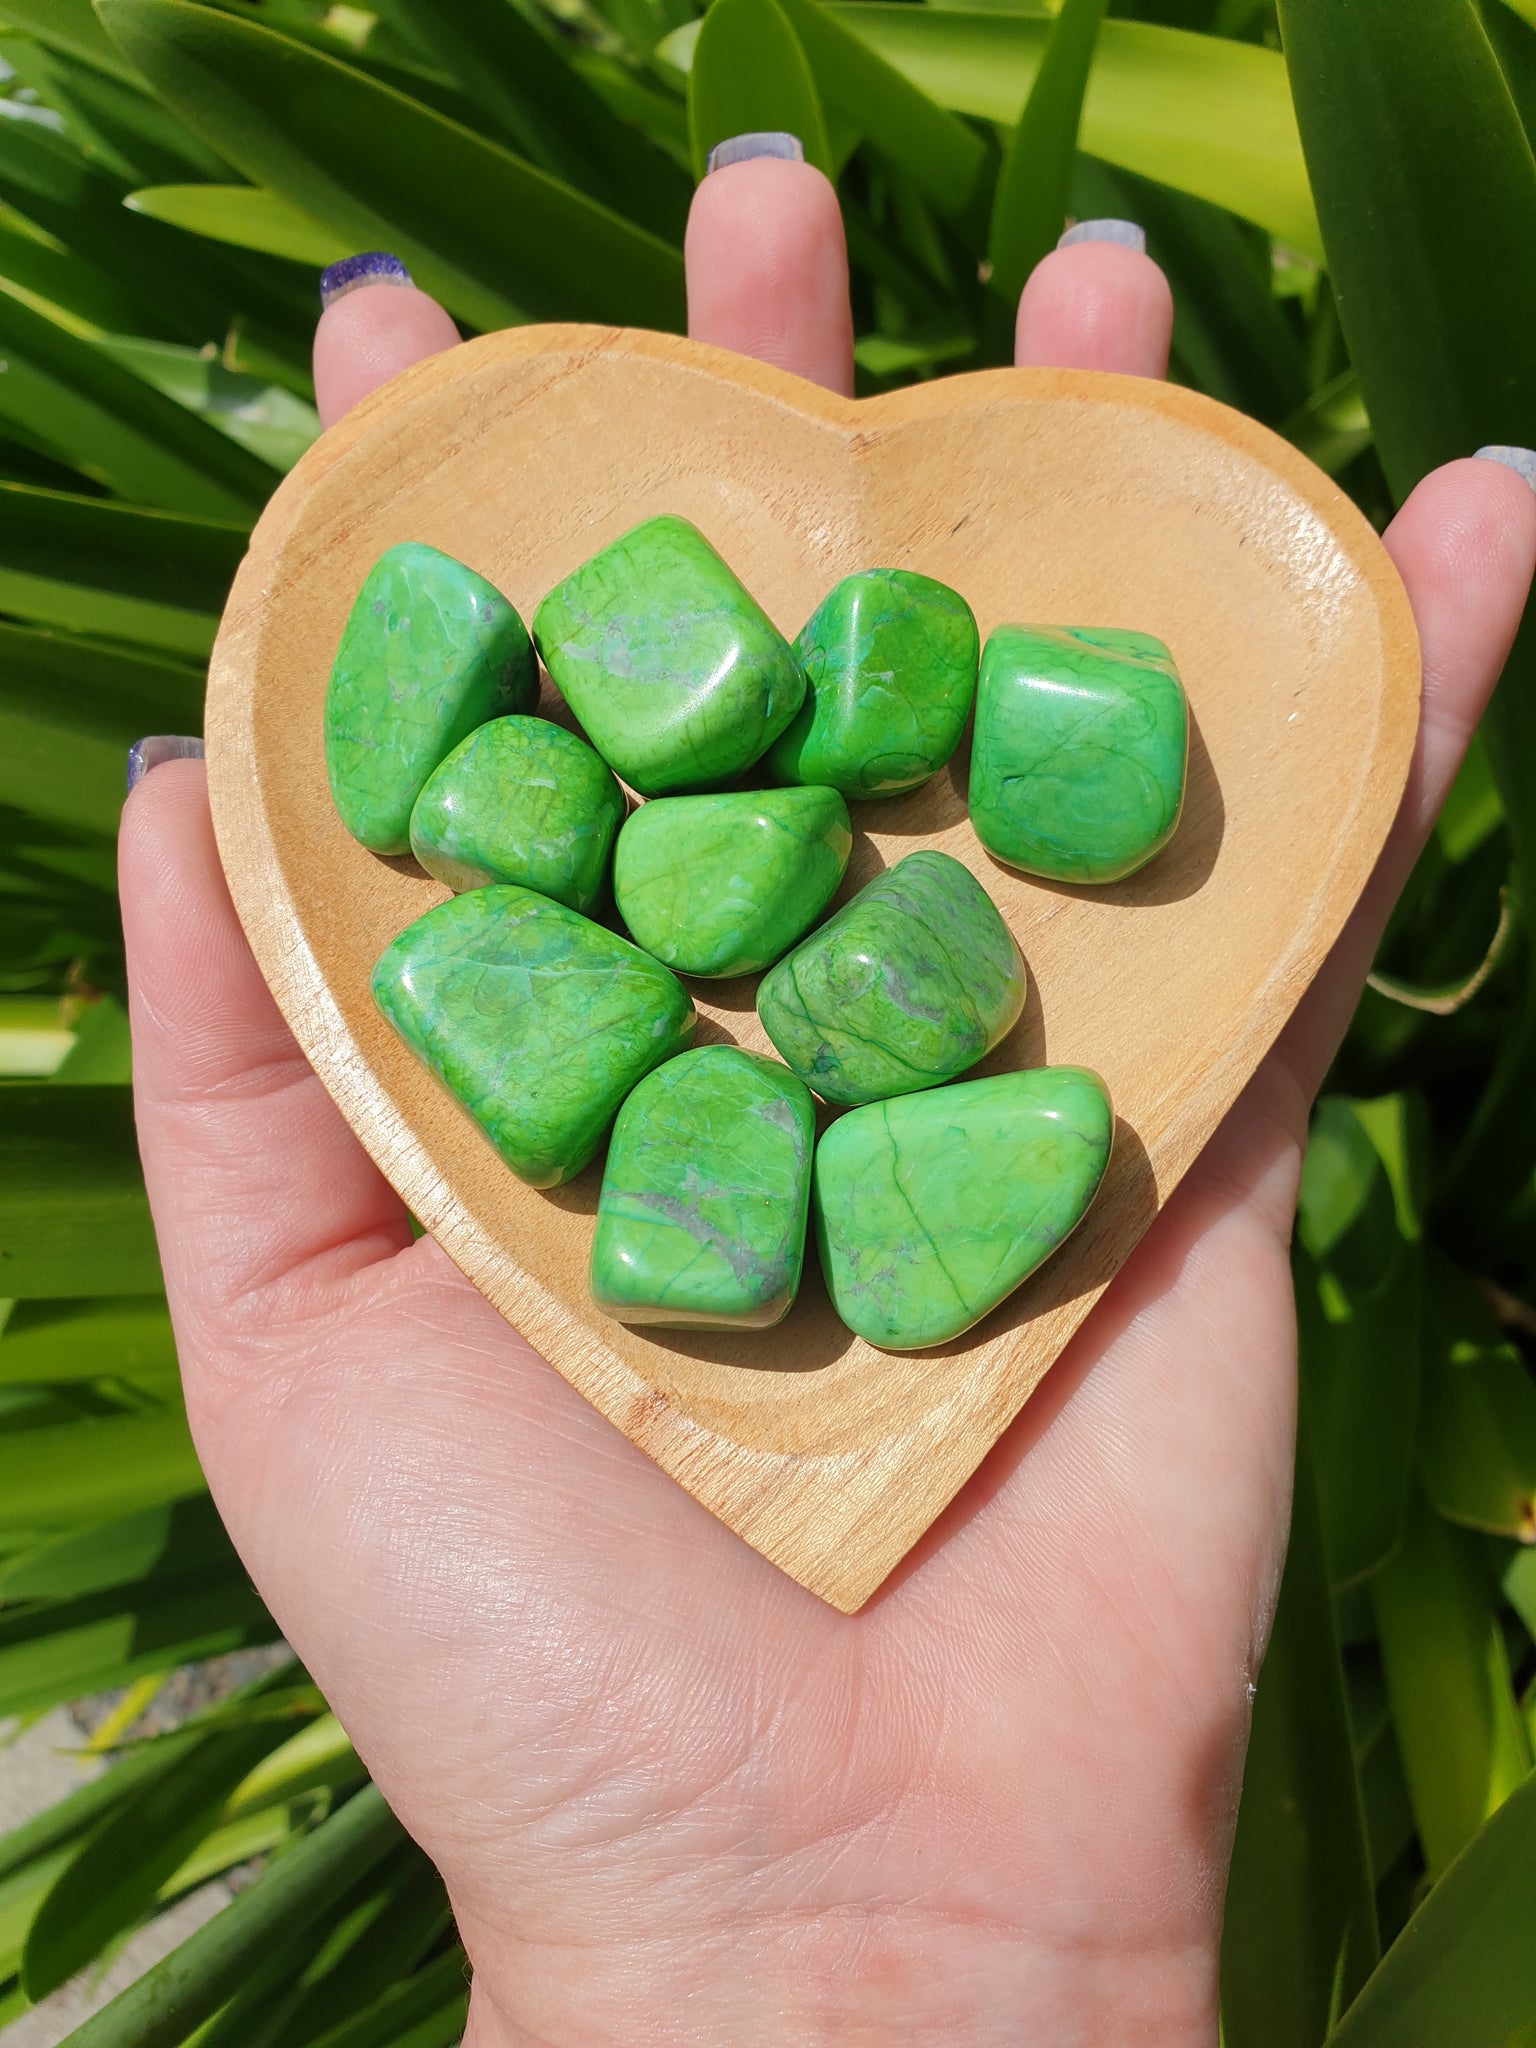 Howlite Green Tumbled Stones 10 Pack $20 Valued at $30